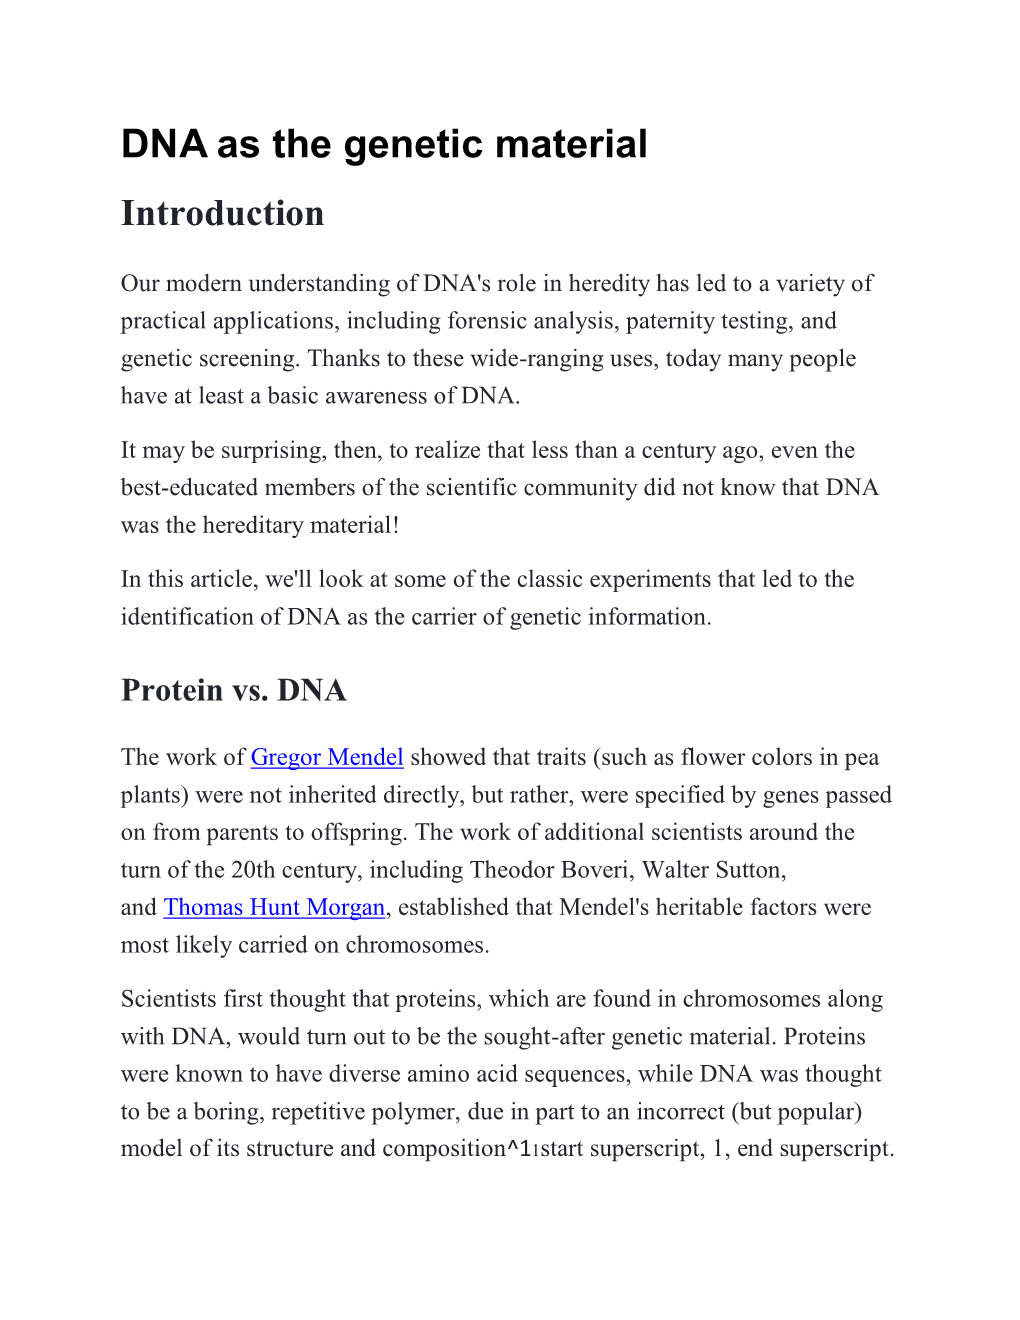 DNA As the Genetic Material Introduction